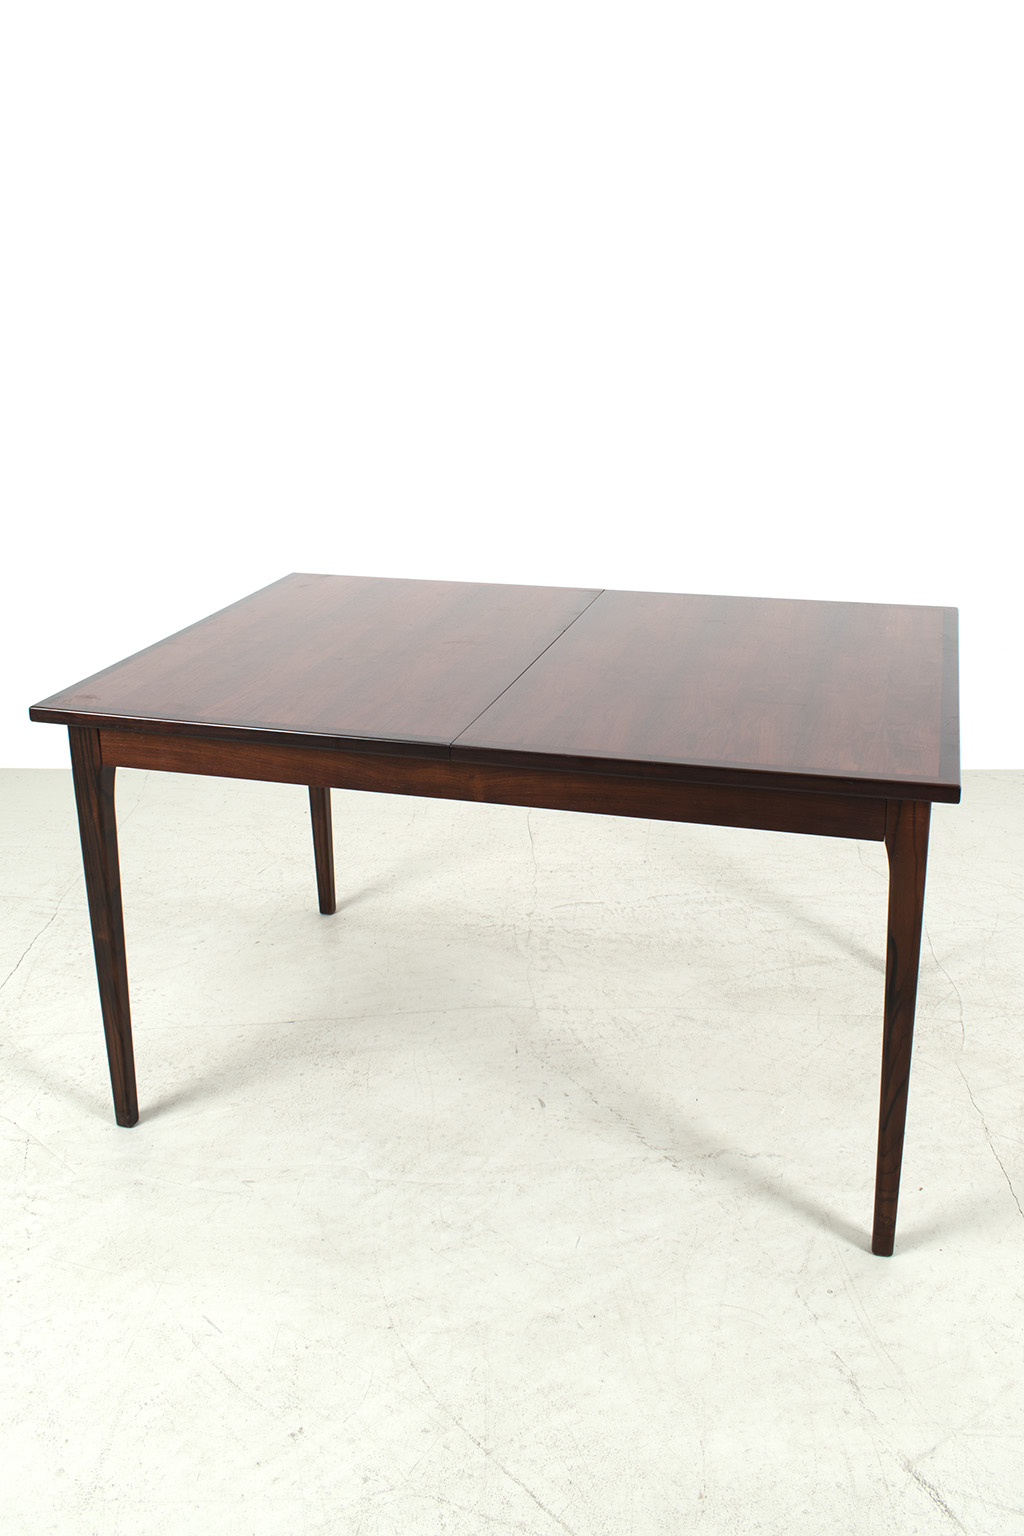 Rectangular rosewood pull-out table